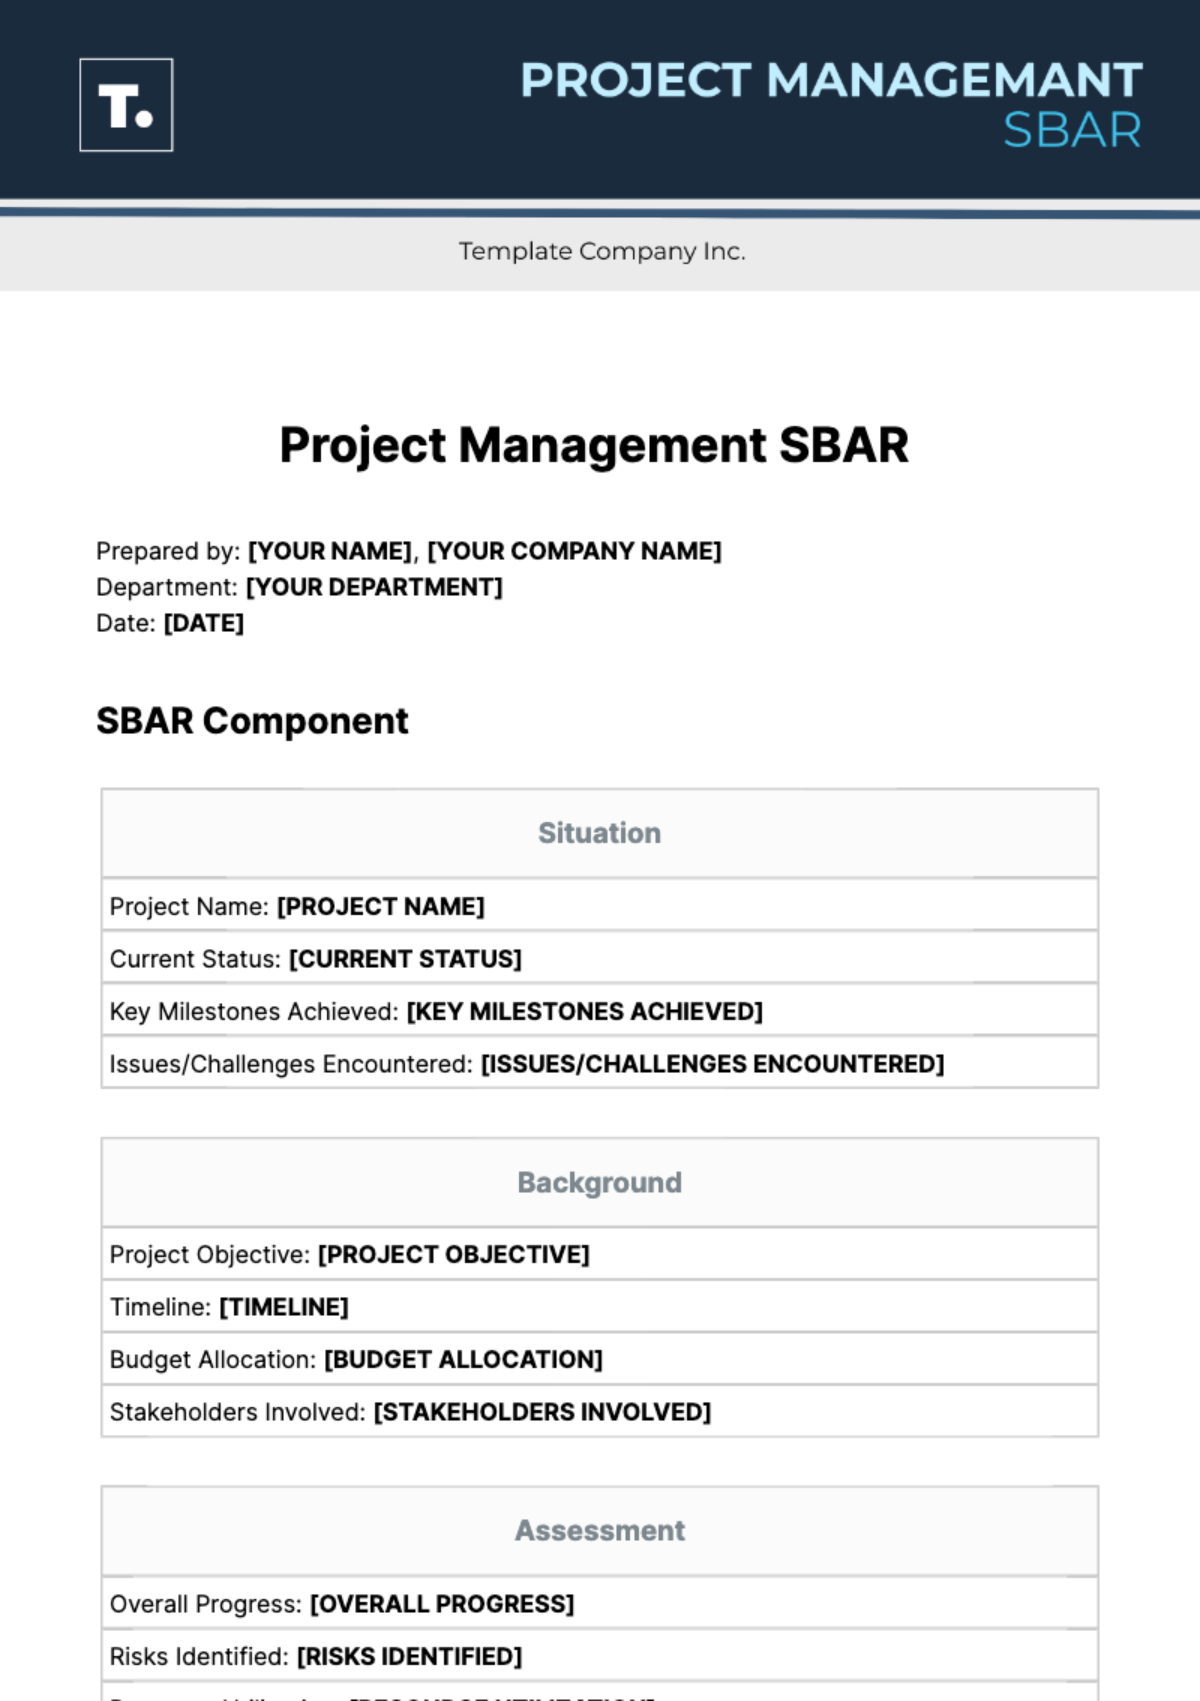 Free Project Management SBAR Template